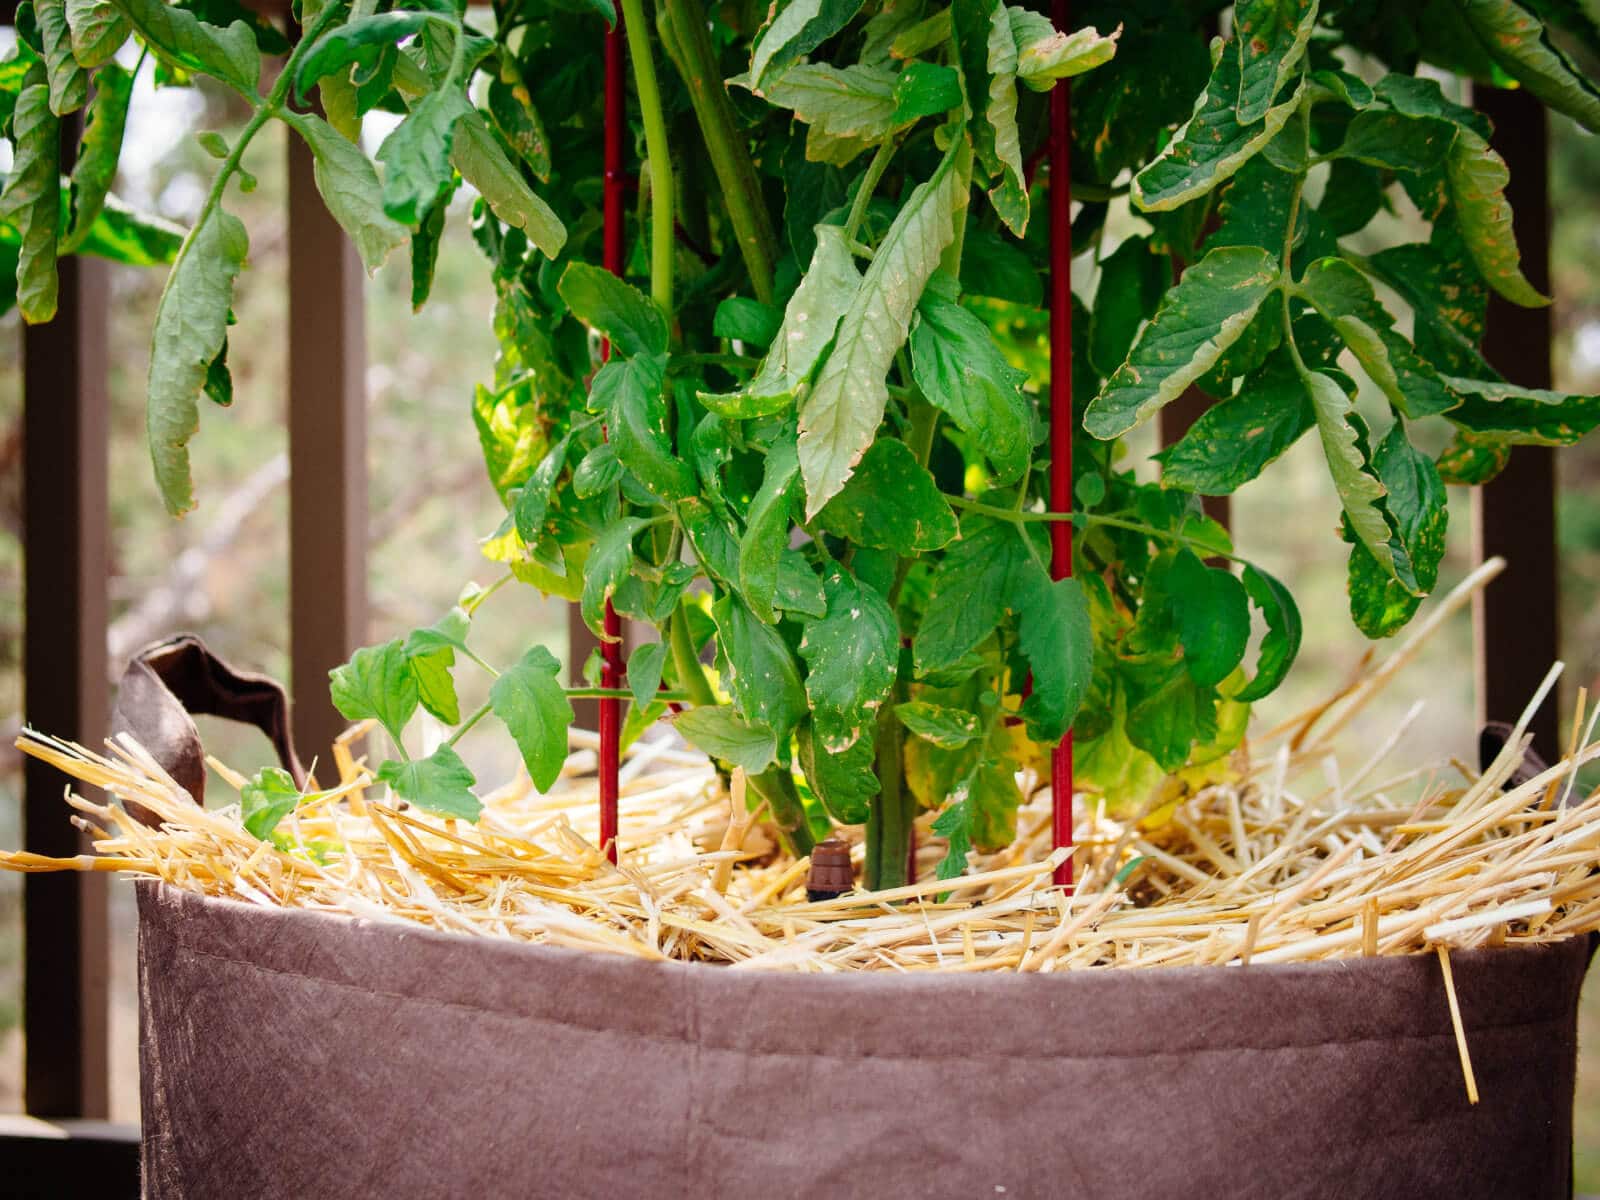 Mulch the soil around your tomato plants